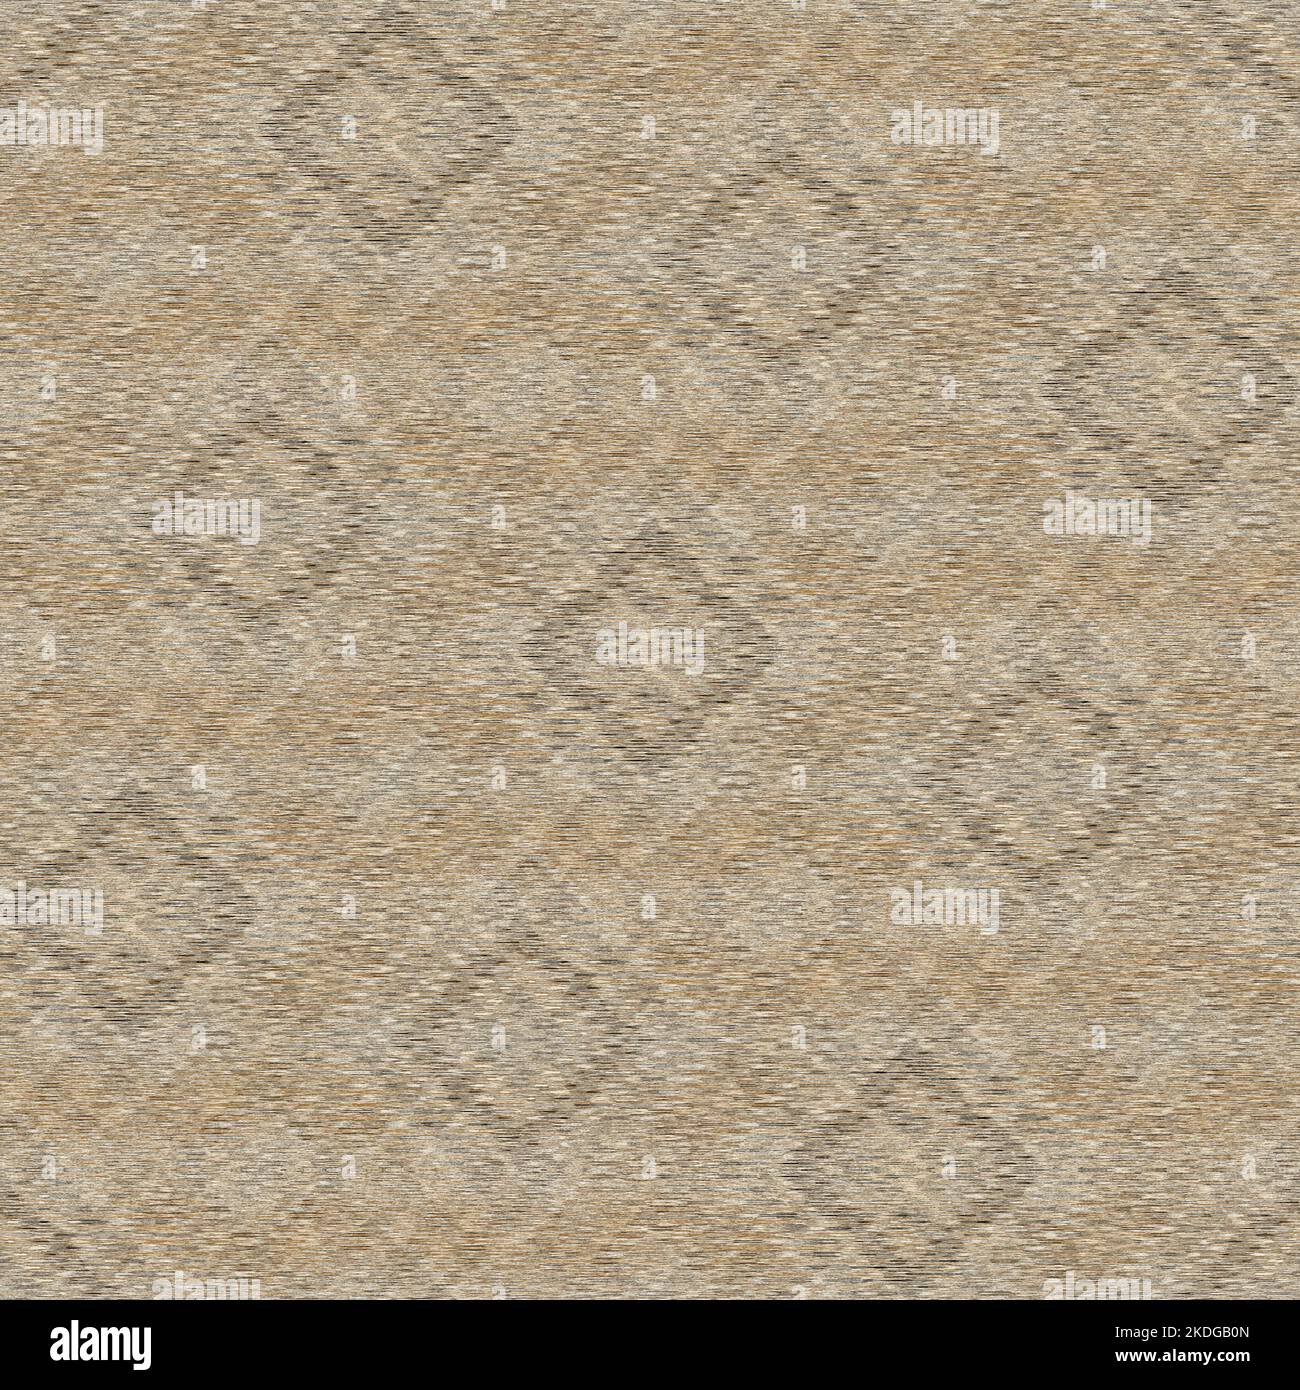 Green heather marl seamless pattern for athleisure